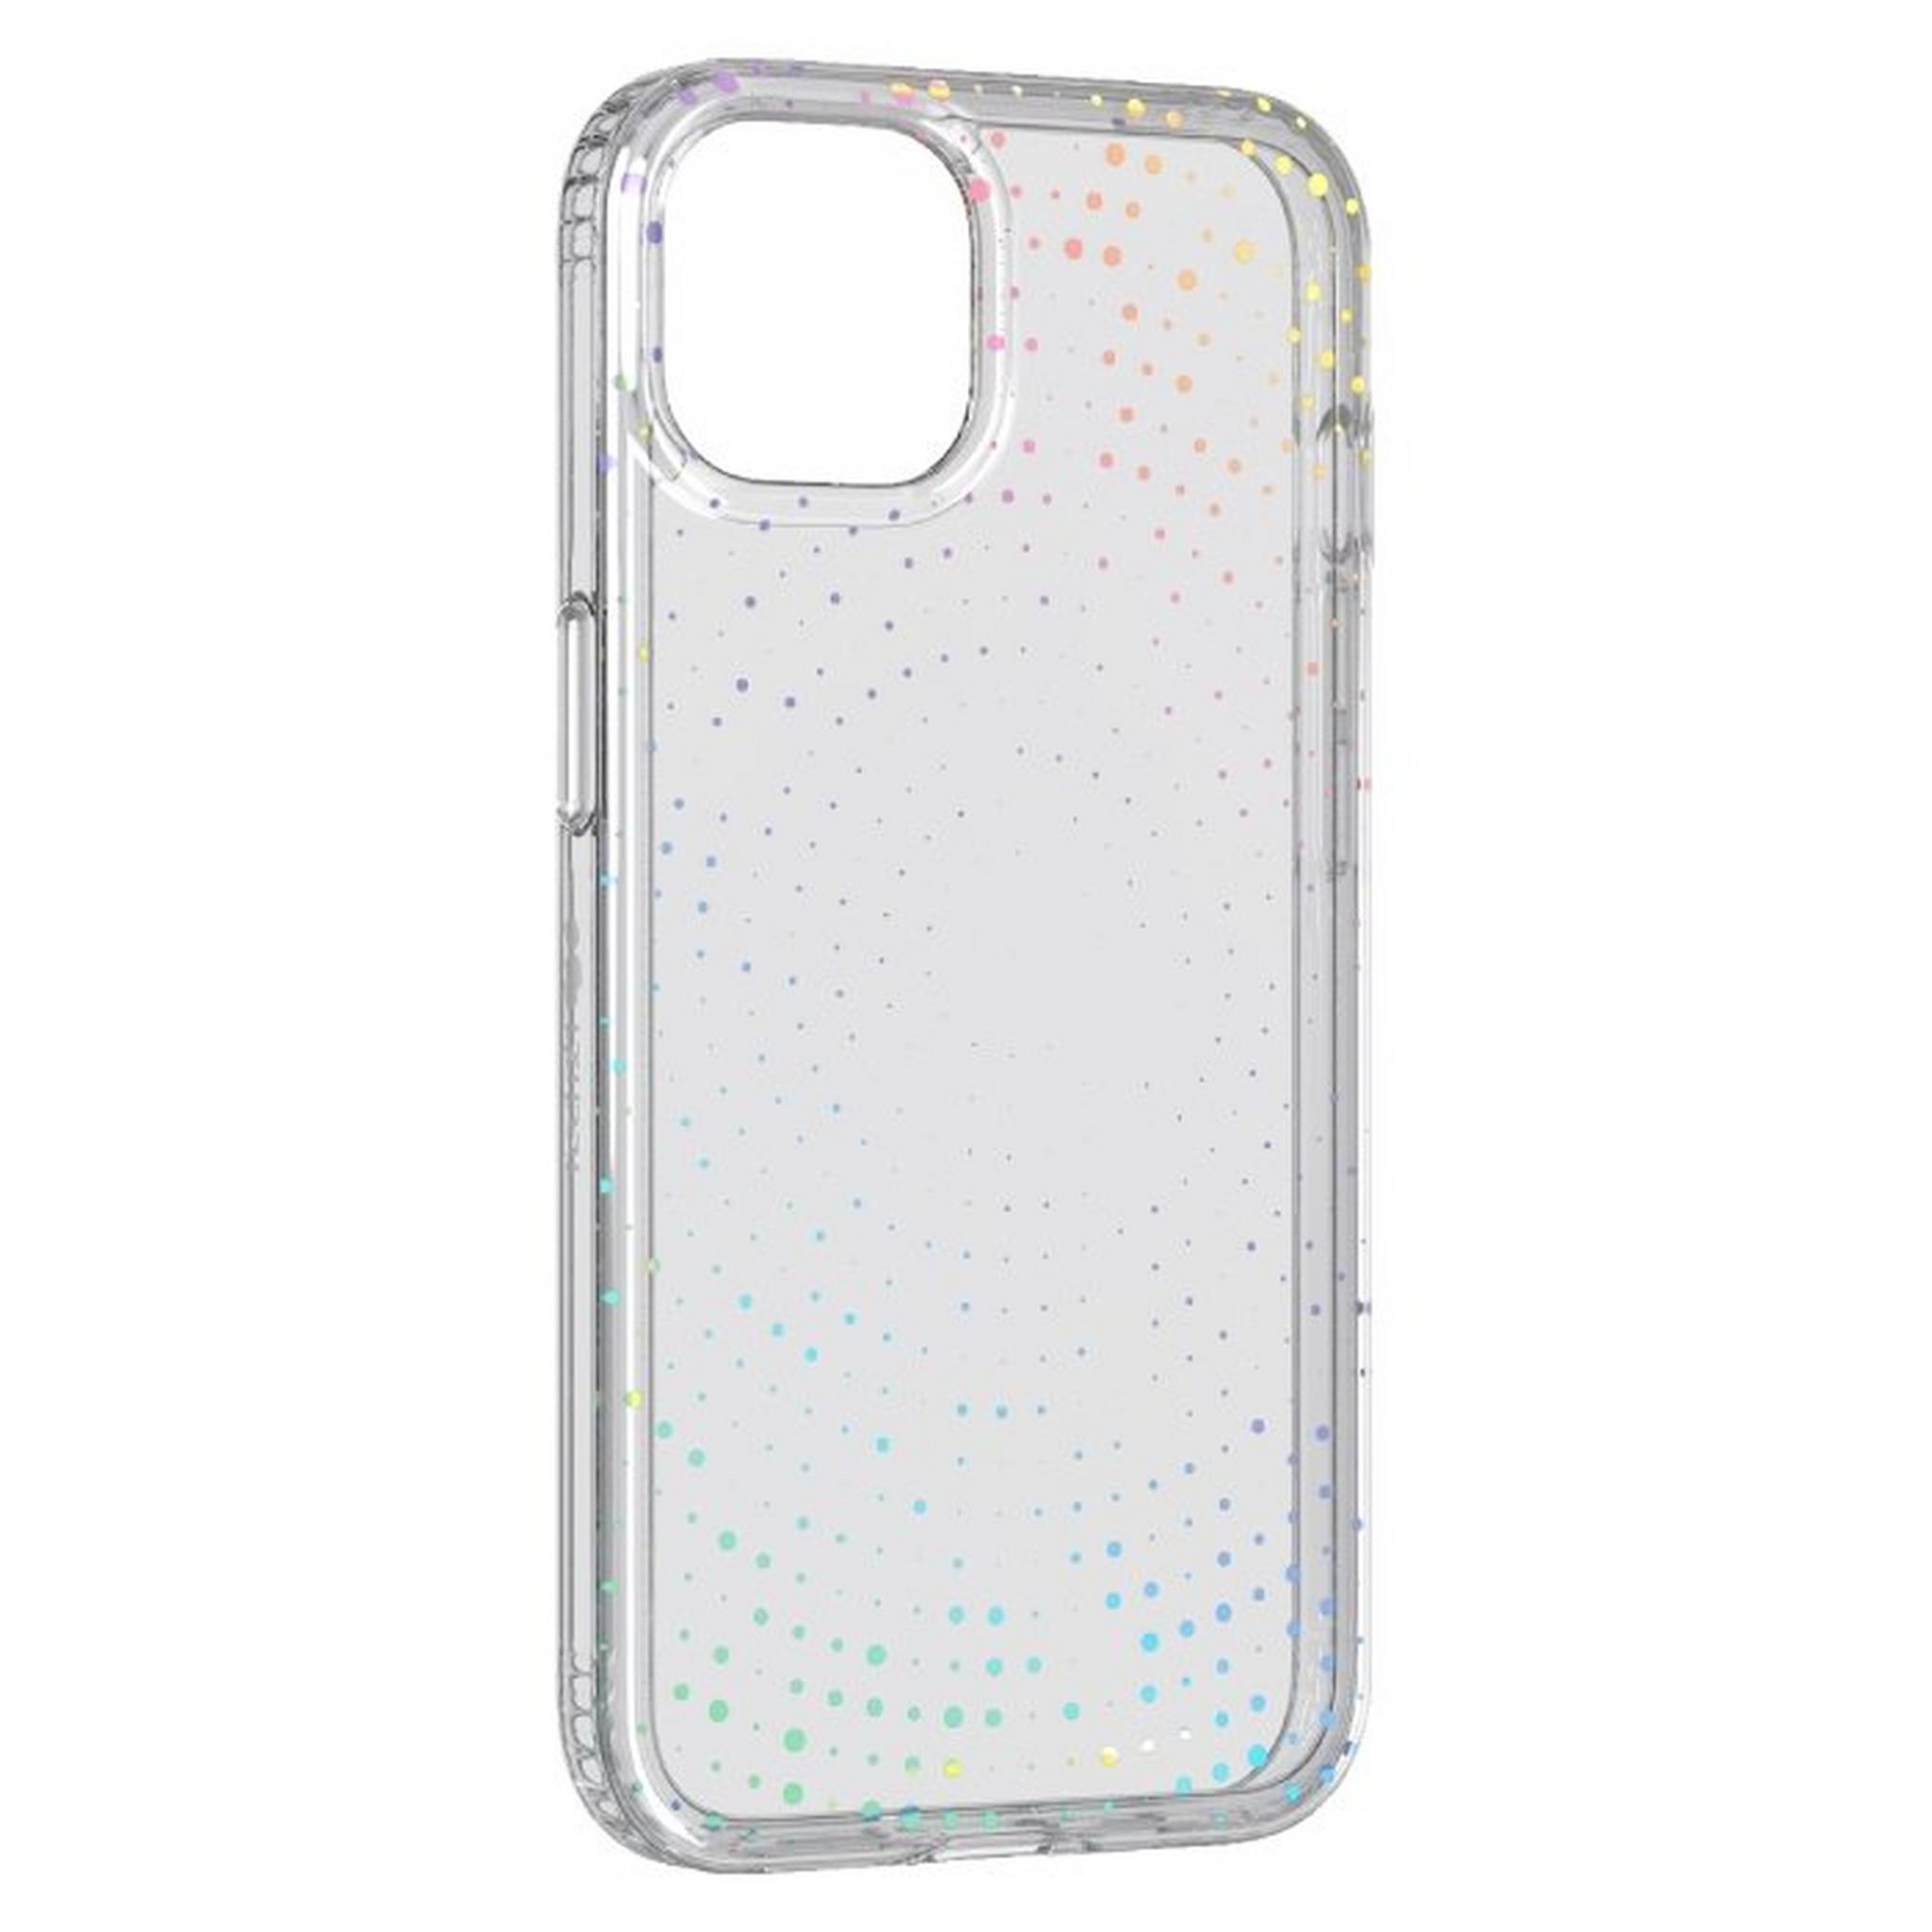 Tech21 Evo Sparkle Case for Apple iPhone 13 Pro Max - Radiant